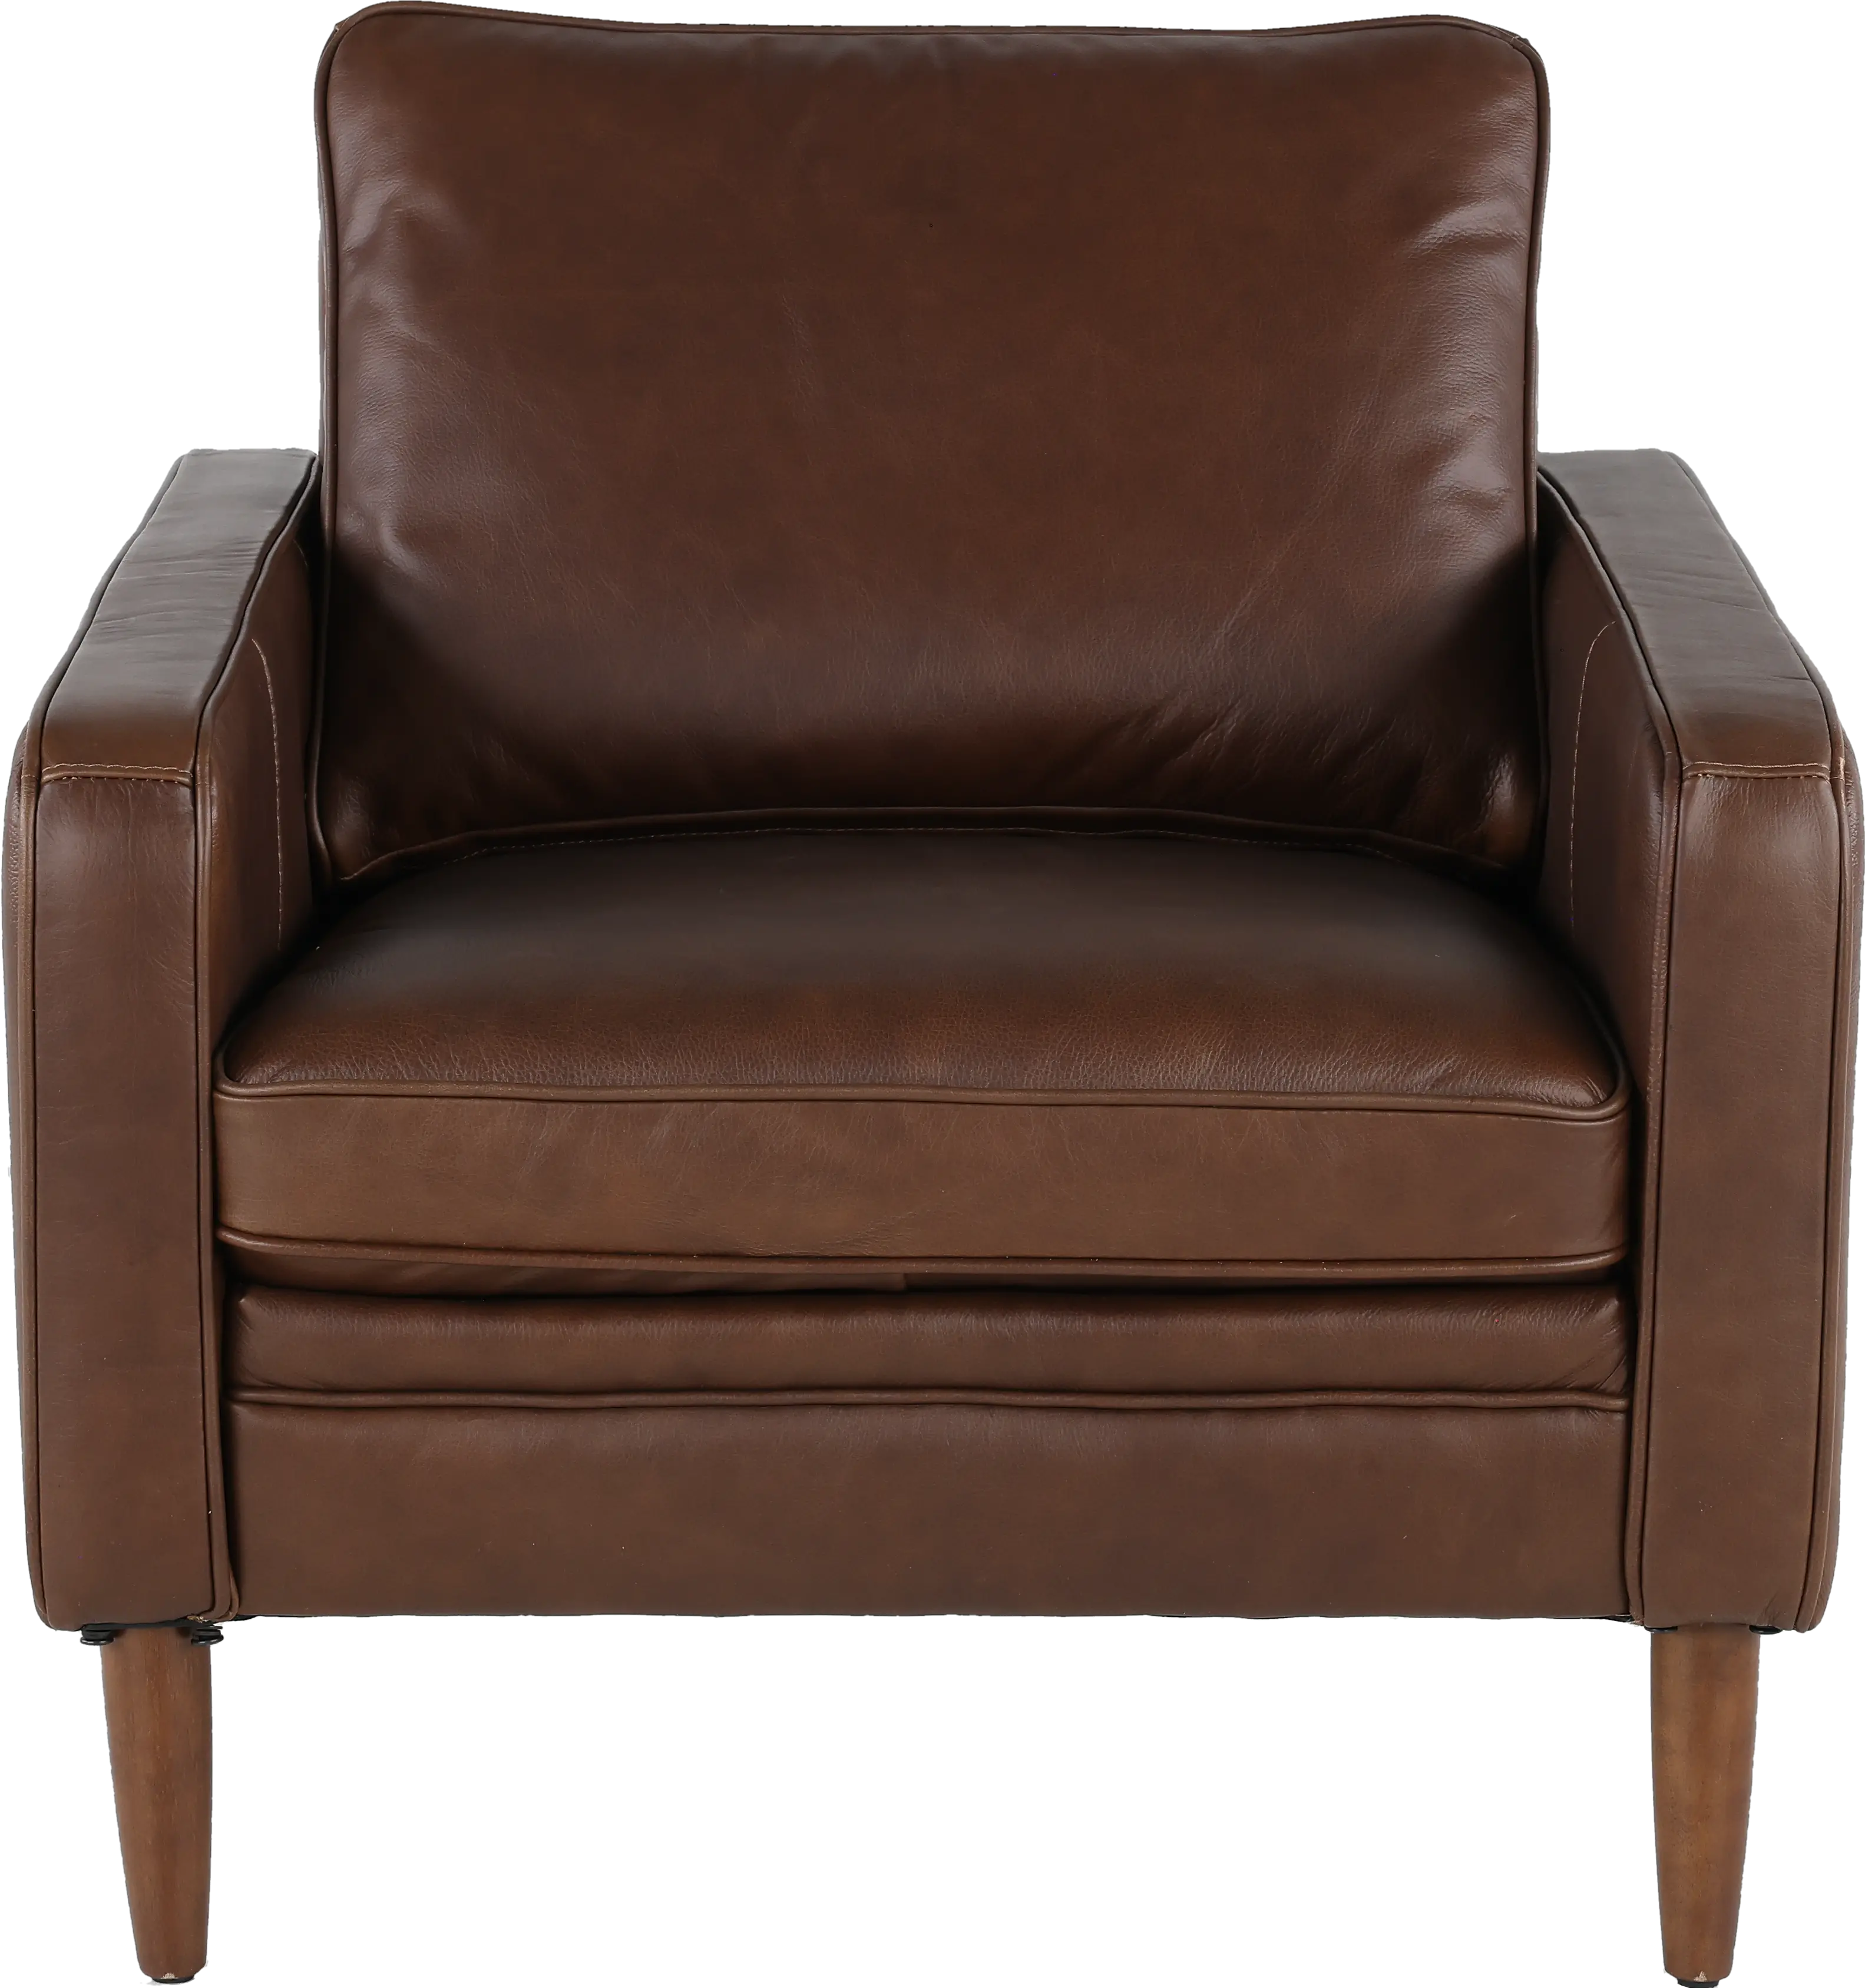 Volcano Brown Leather Chair